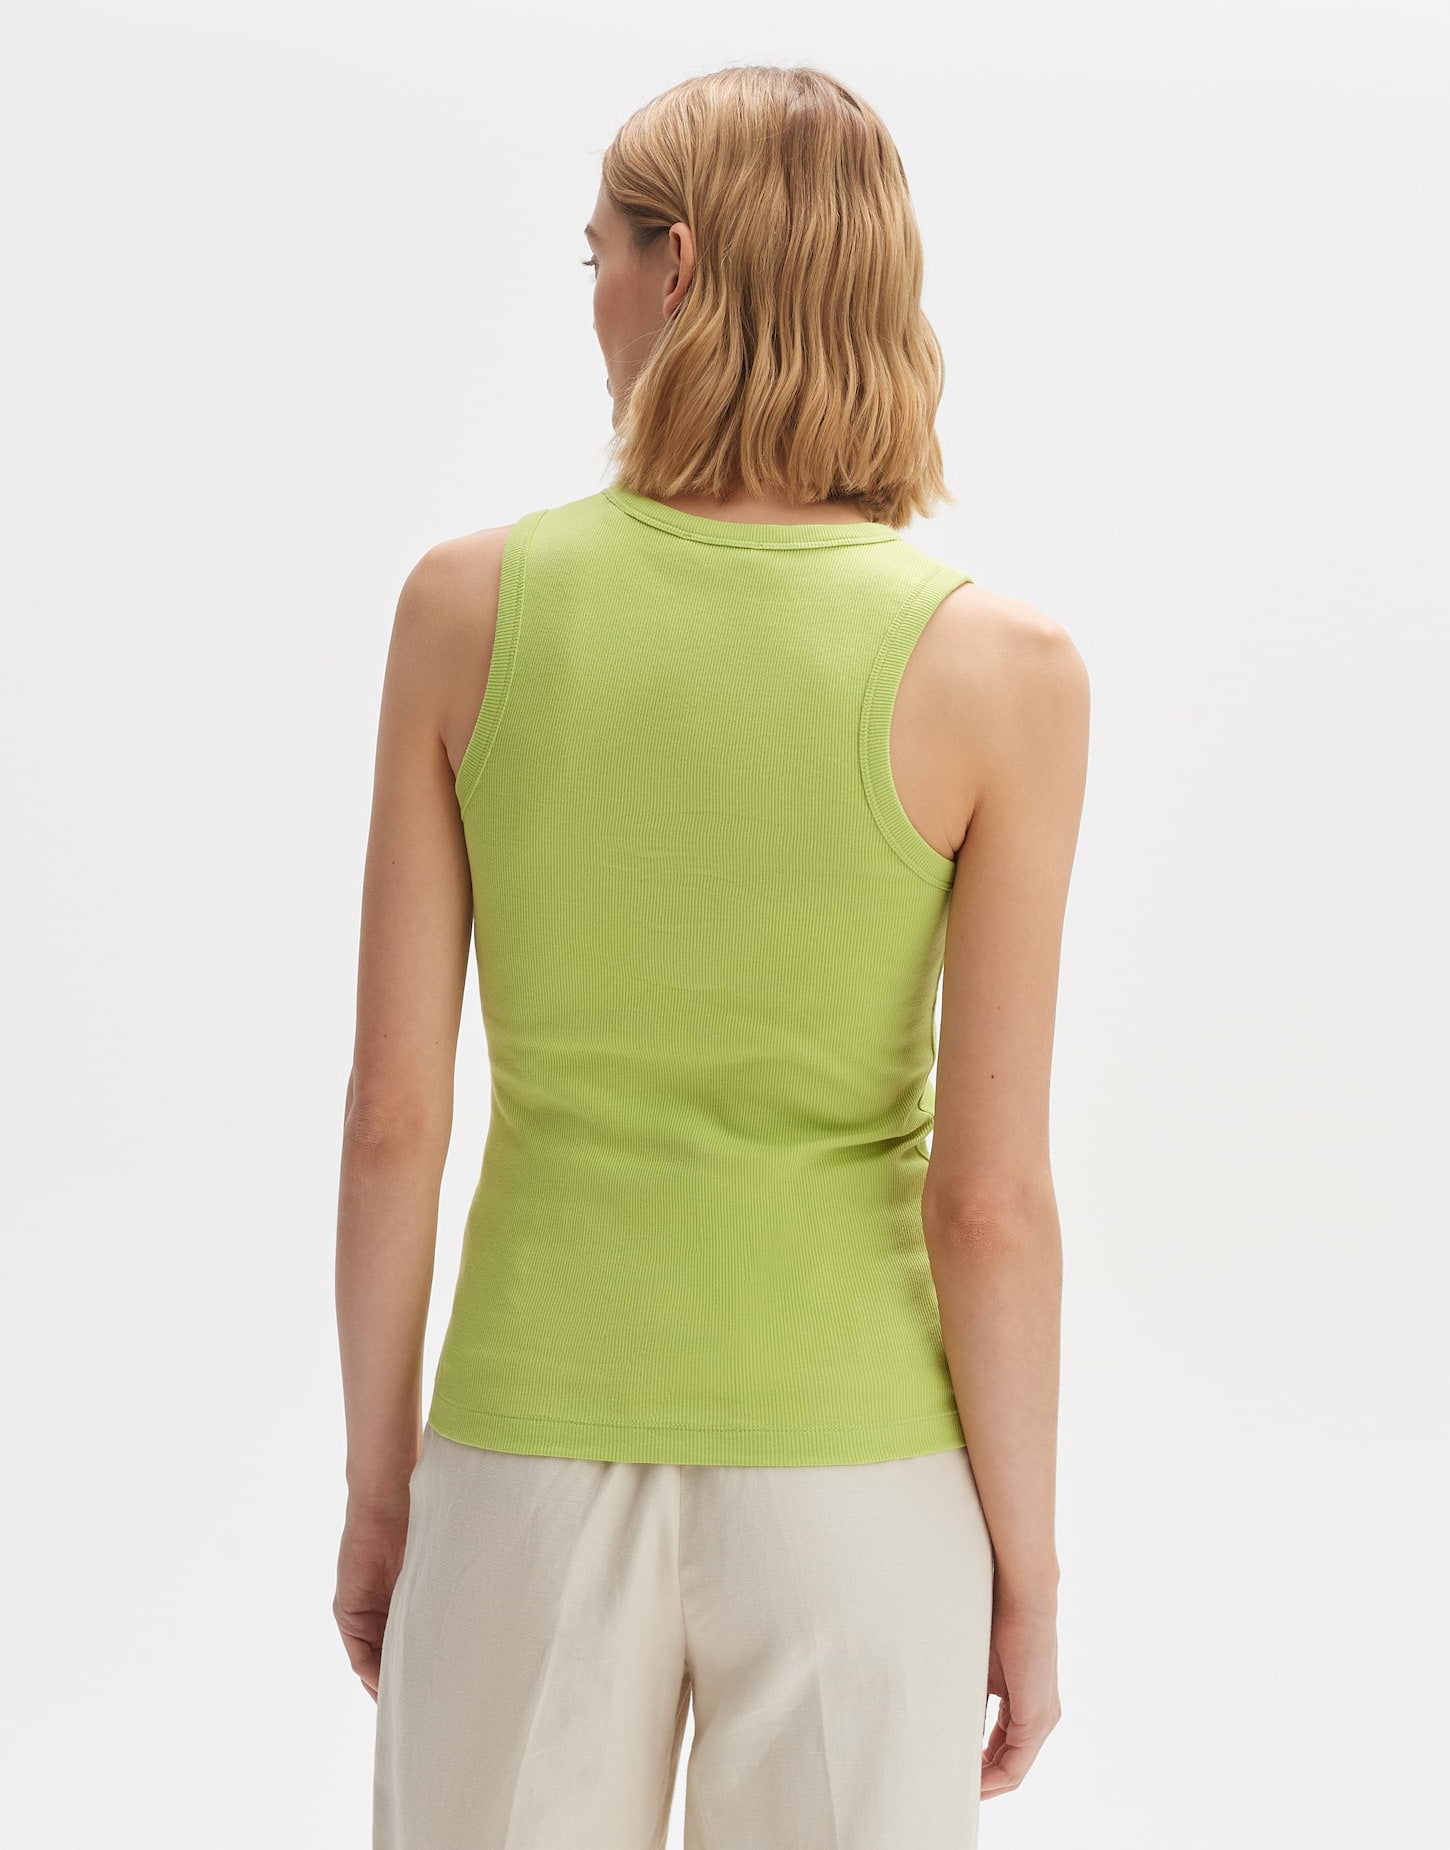 Ilesso (Lime Green)